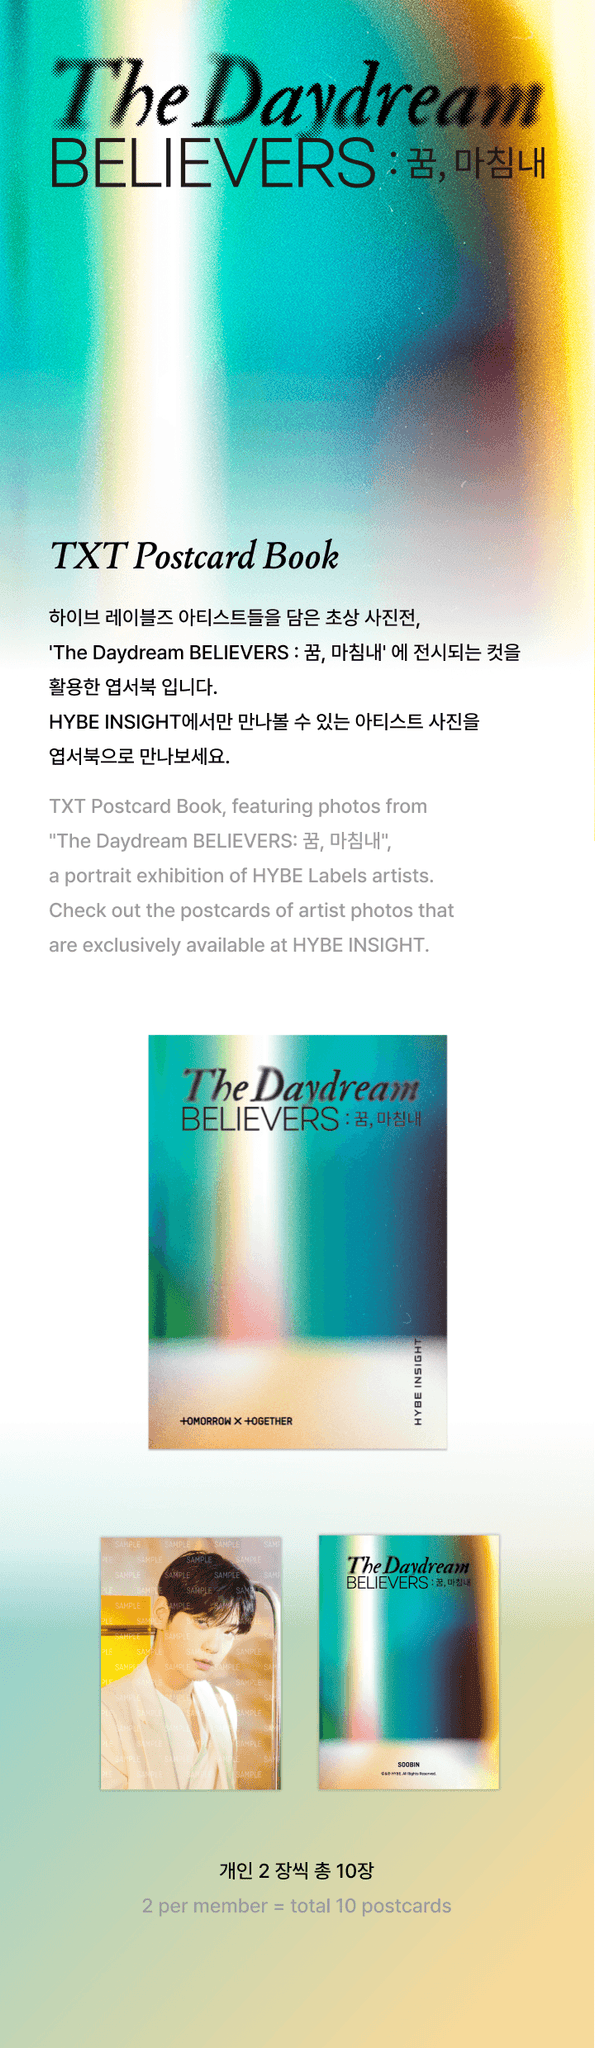 TOMORROW X TOGETHER TXT The Daydream Believers Postcard Book